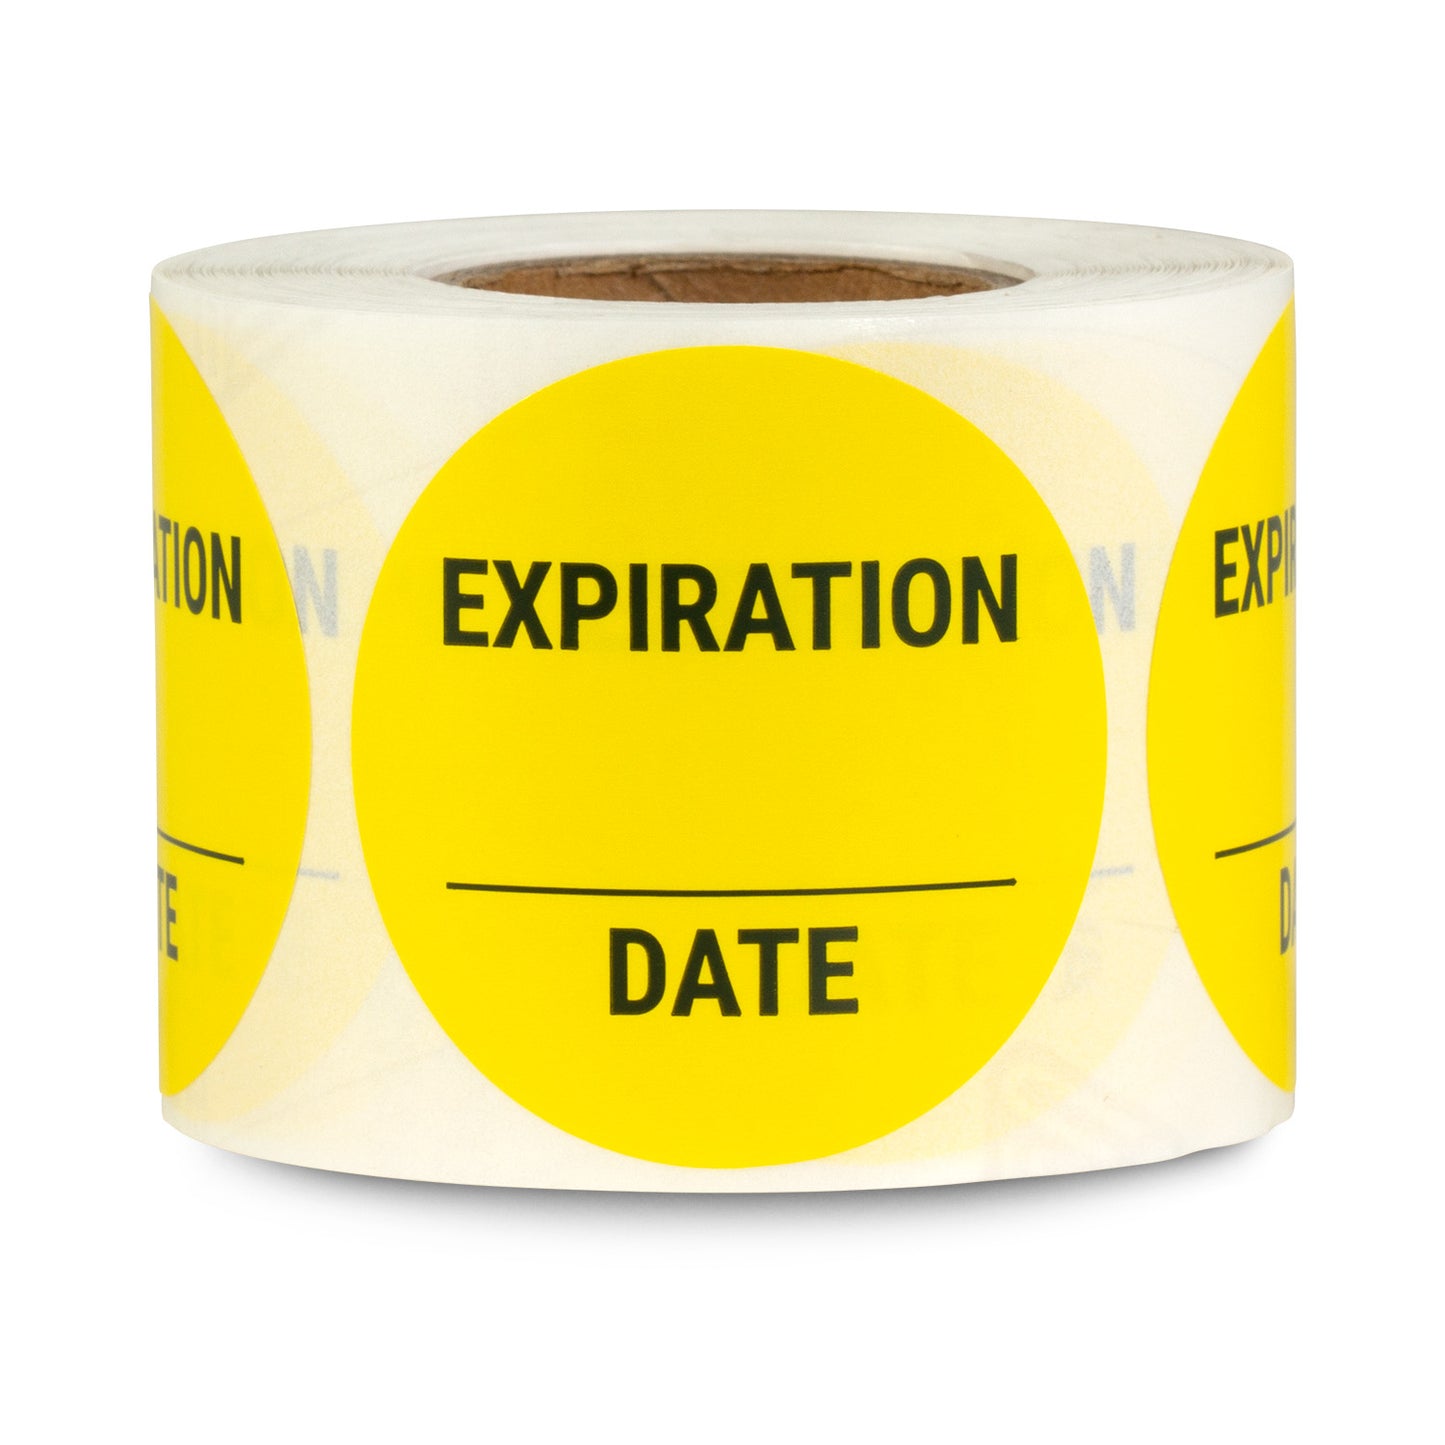 1.5 inch | Food Storage: Expiration Date Stickers with Write-in Area